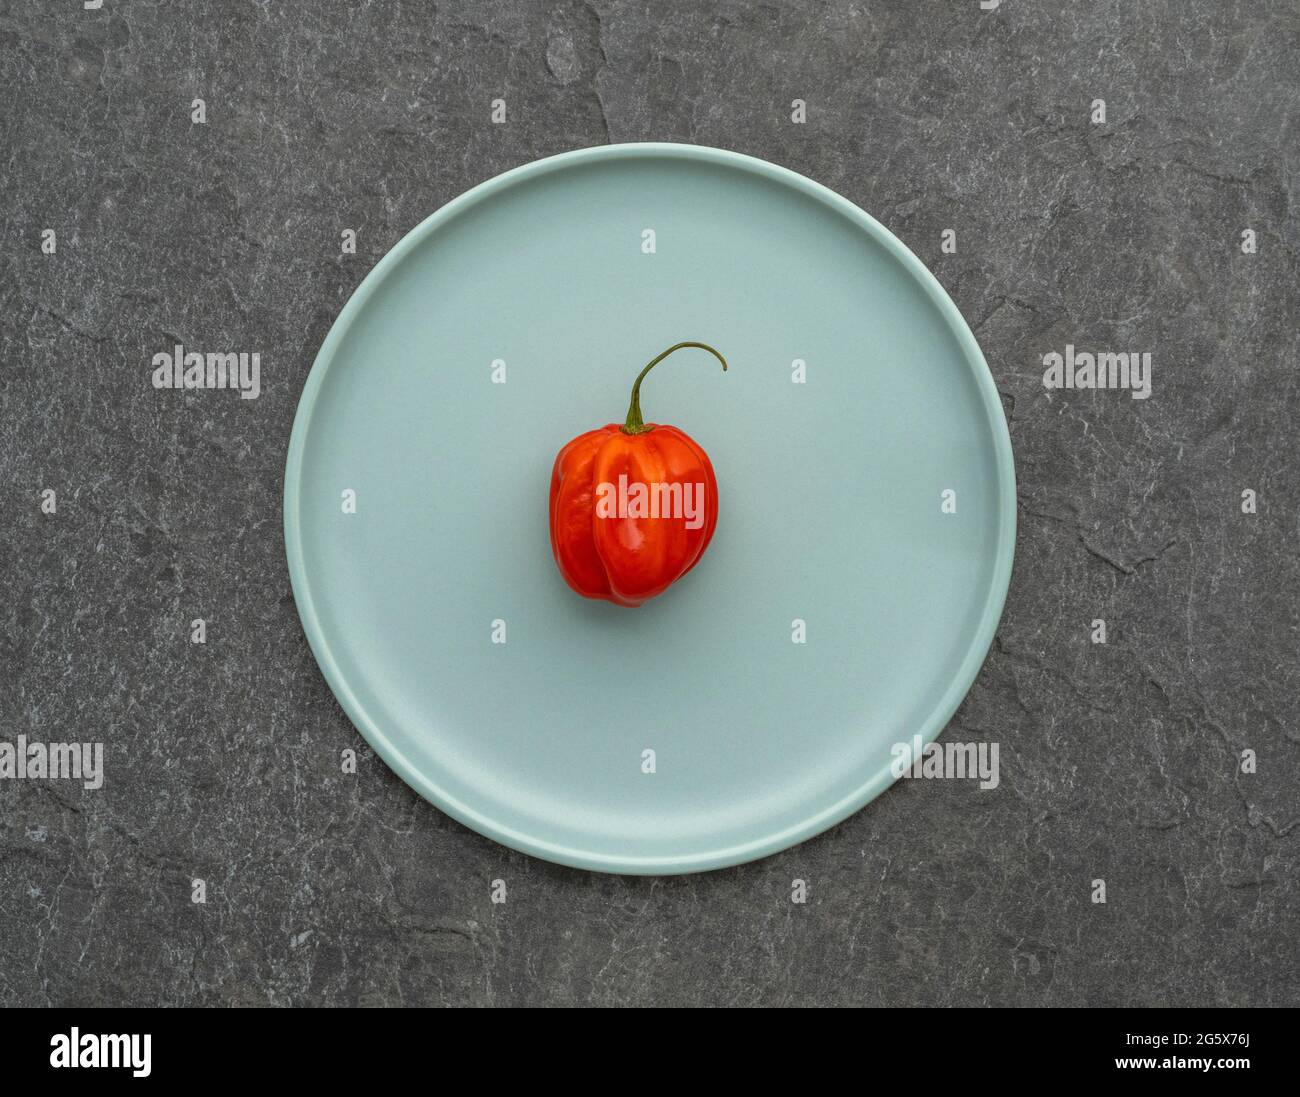 Plan view of a red Scotch Bonnet chilli pepper on a duck egg blue plate. Stock Photo